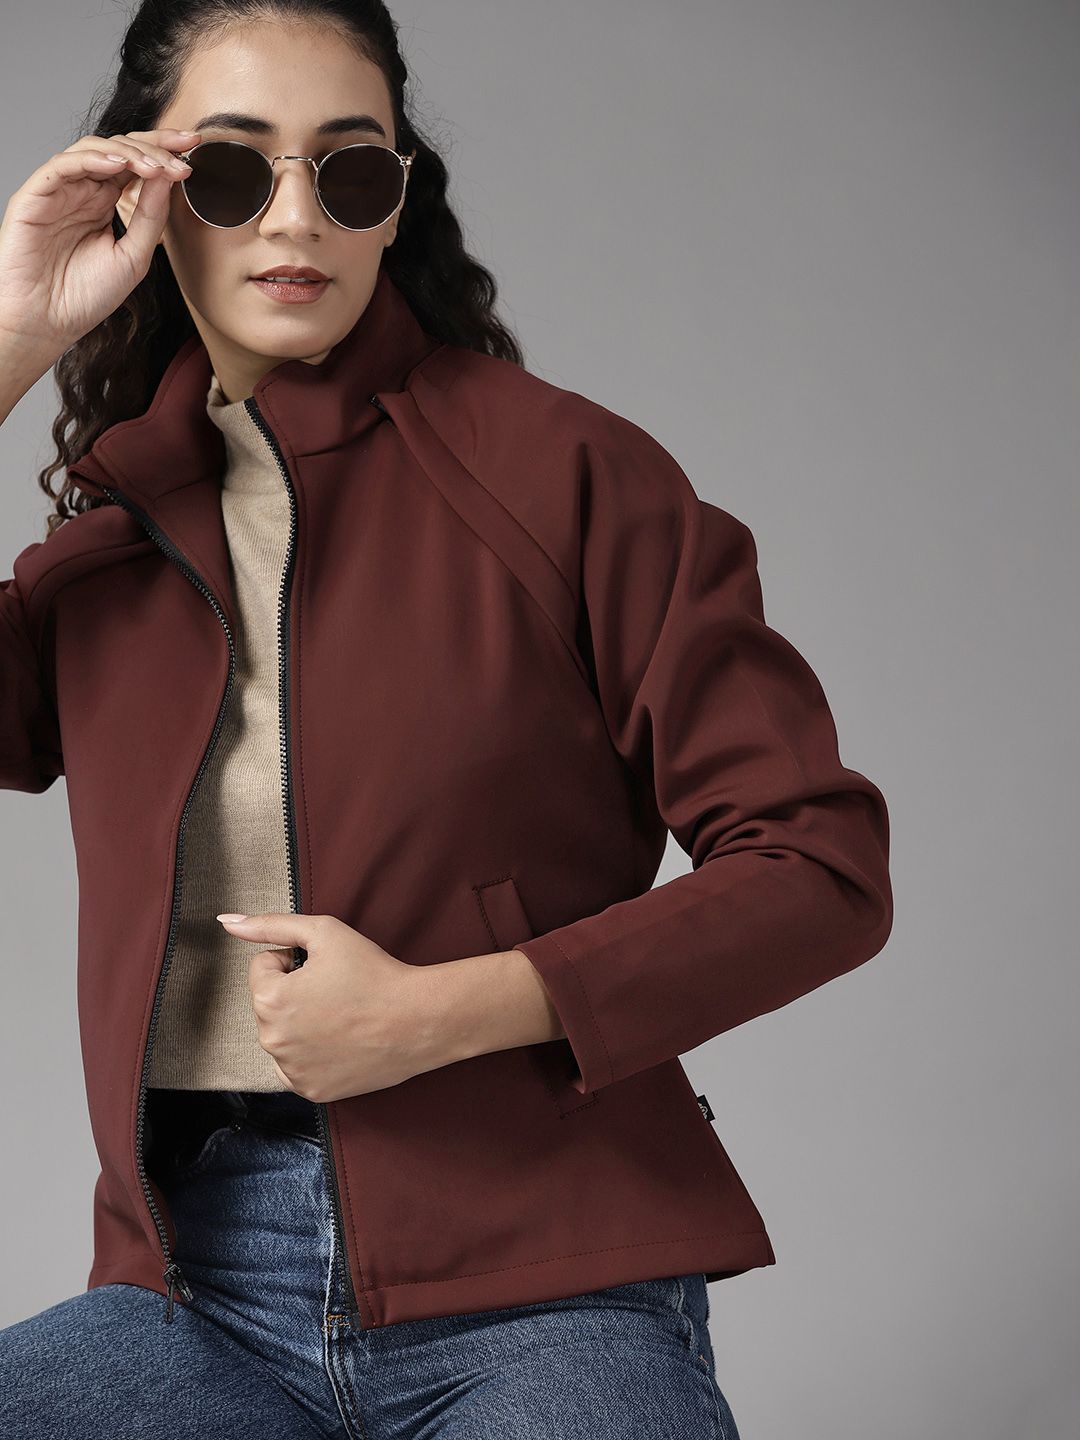 Roadster Women Burgundy Convertible Jacket with Detachable Sleeves Price in India